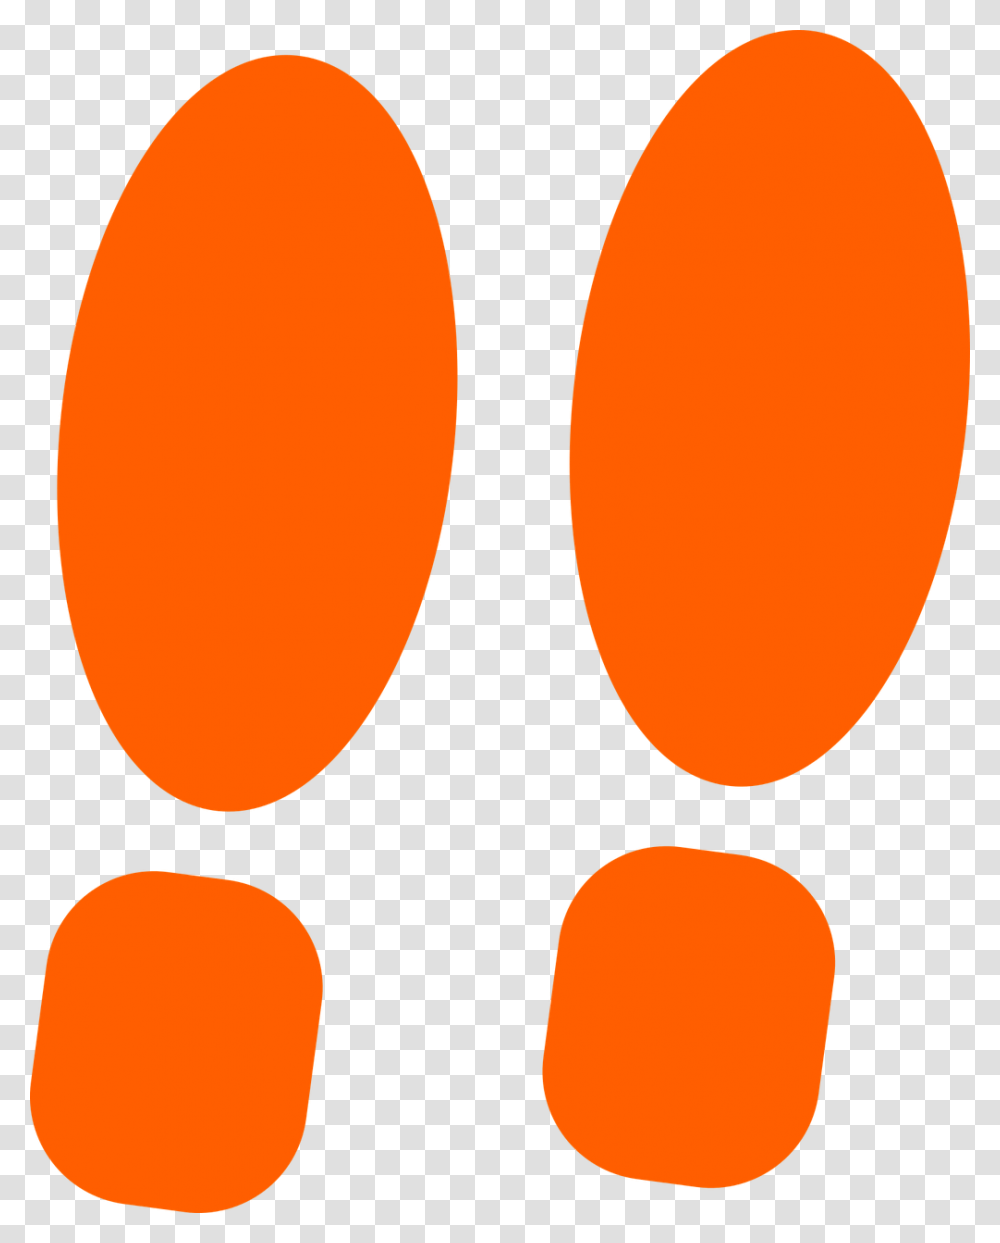 Footsteps Steps Icon Free Picture Orange Footsteps, Balloon, Cutlery, Tie, Accessories Transparent Png